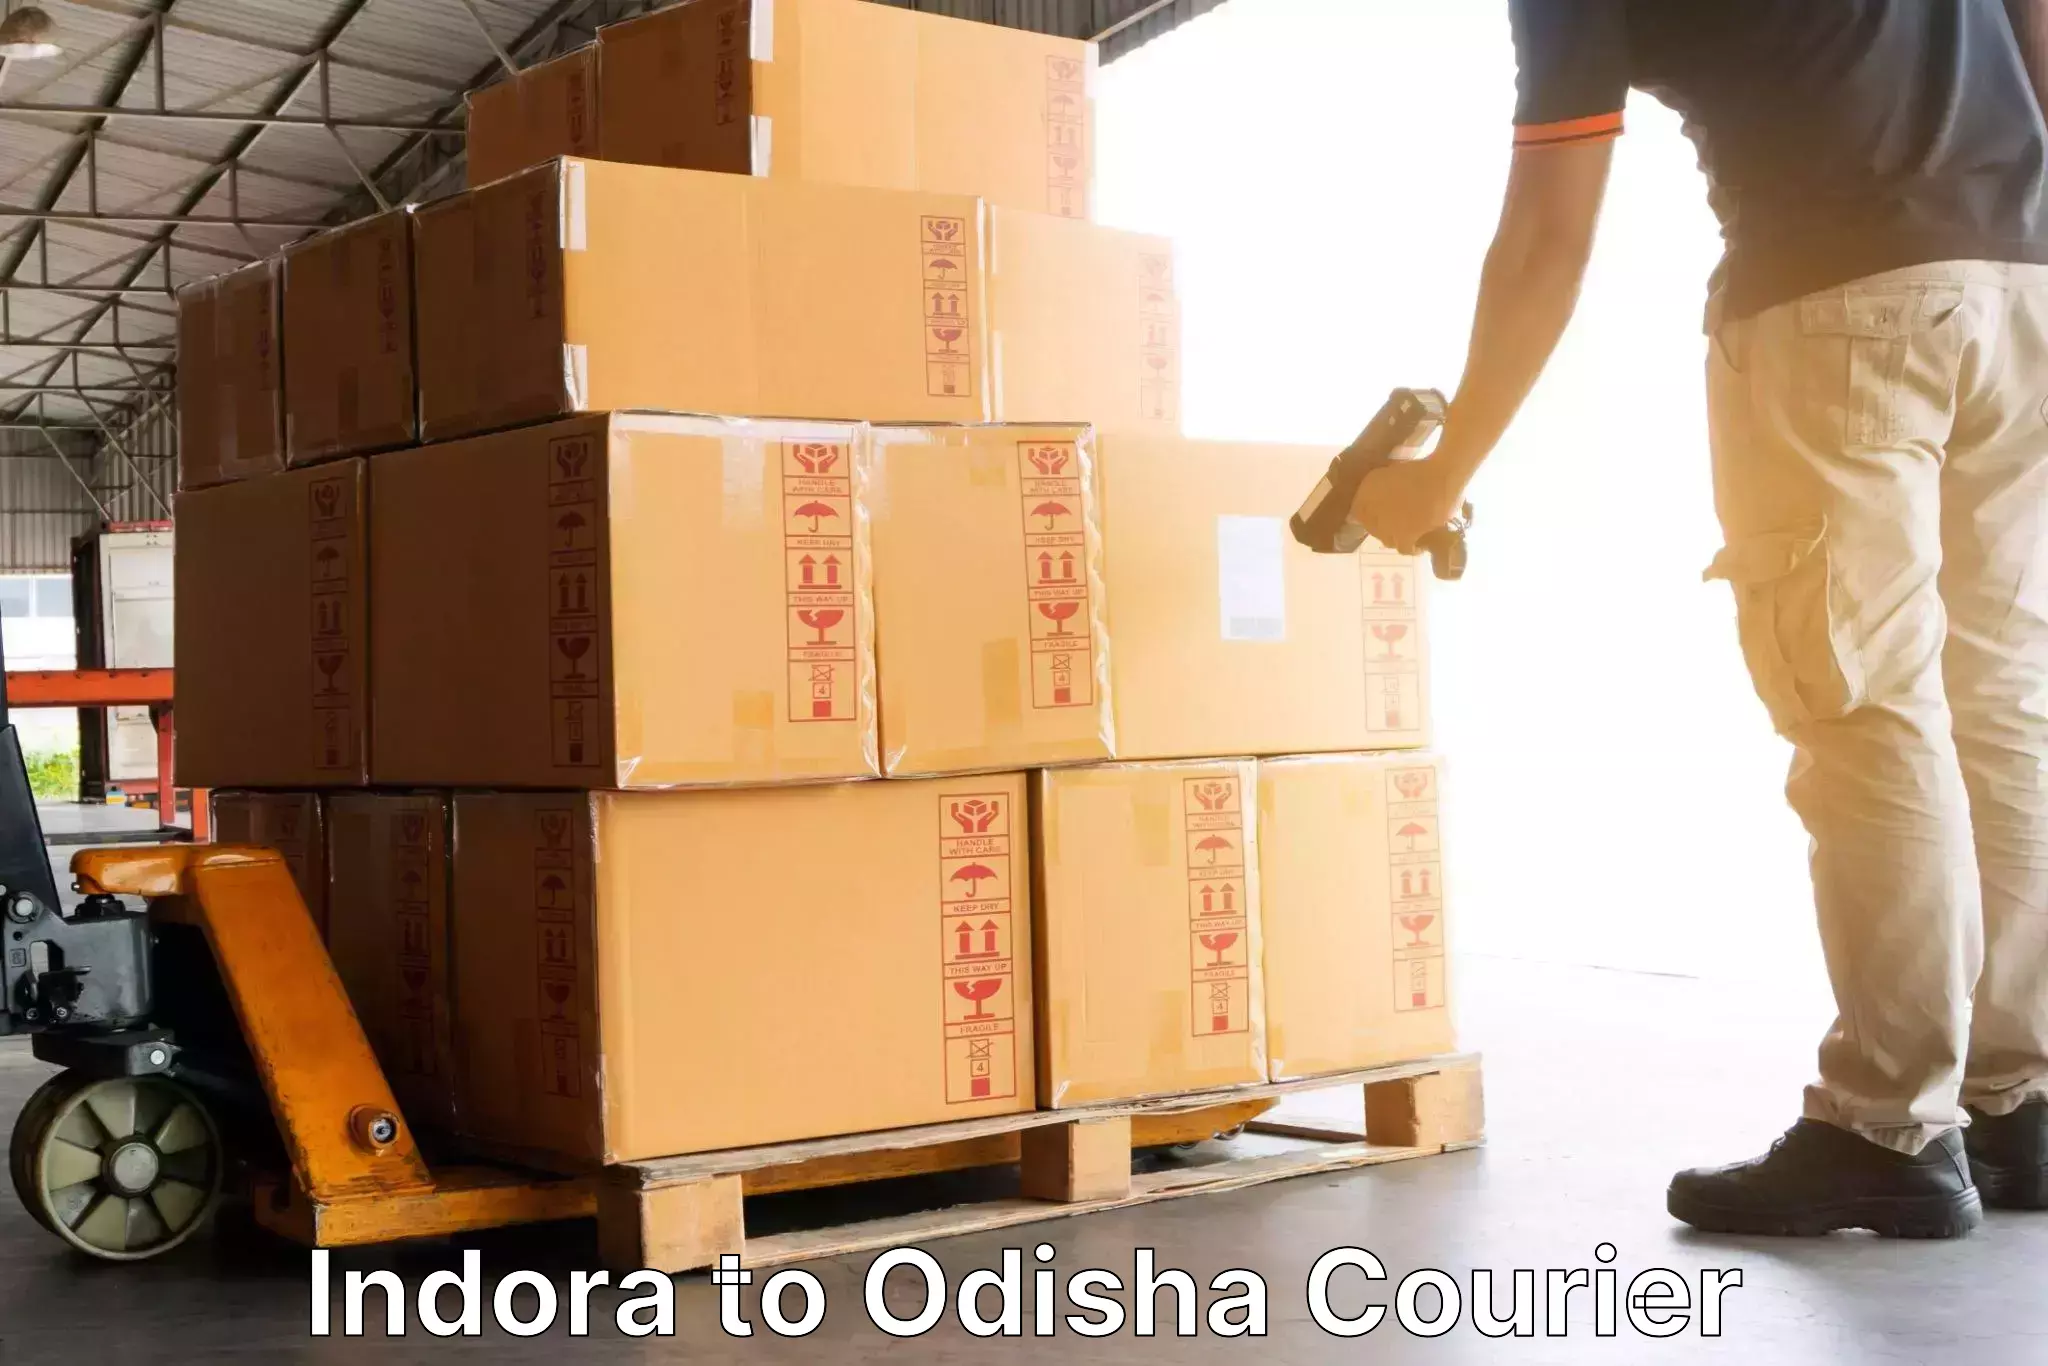 Weekend courier service in Indora to Sohela